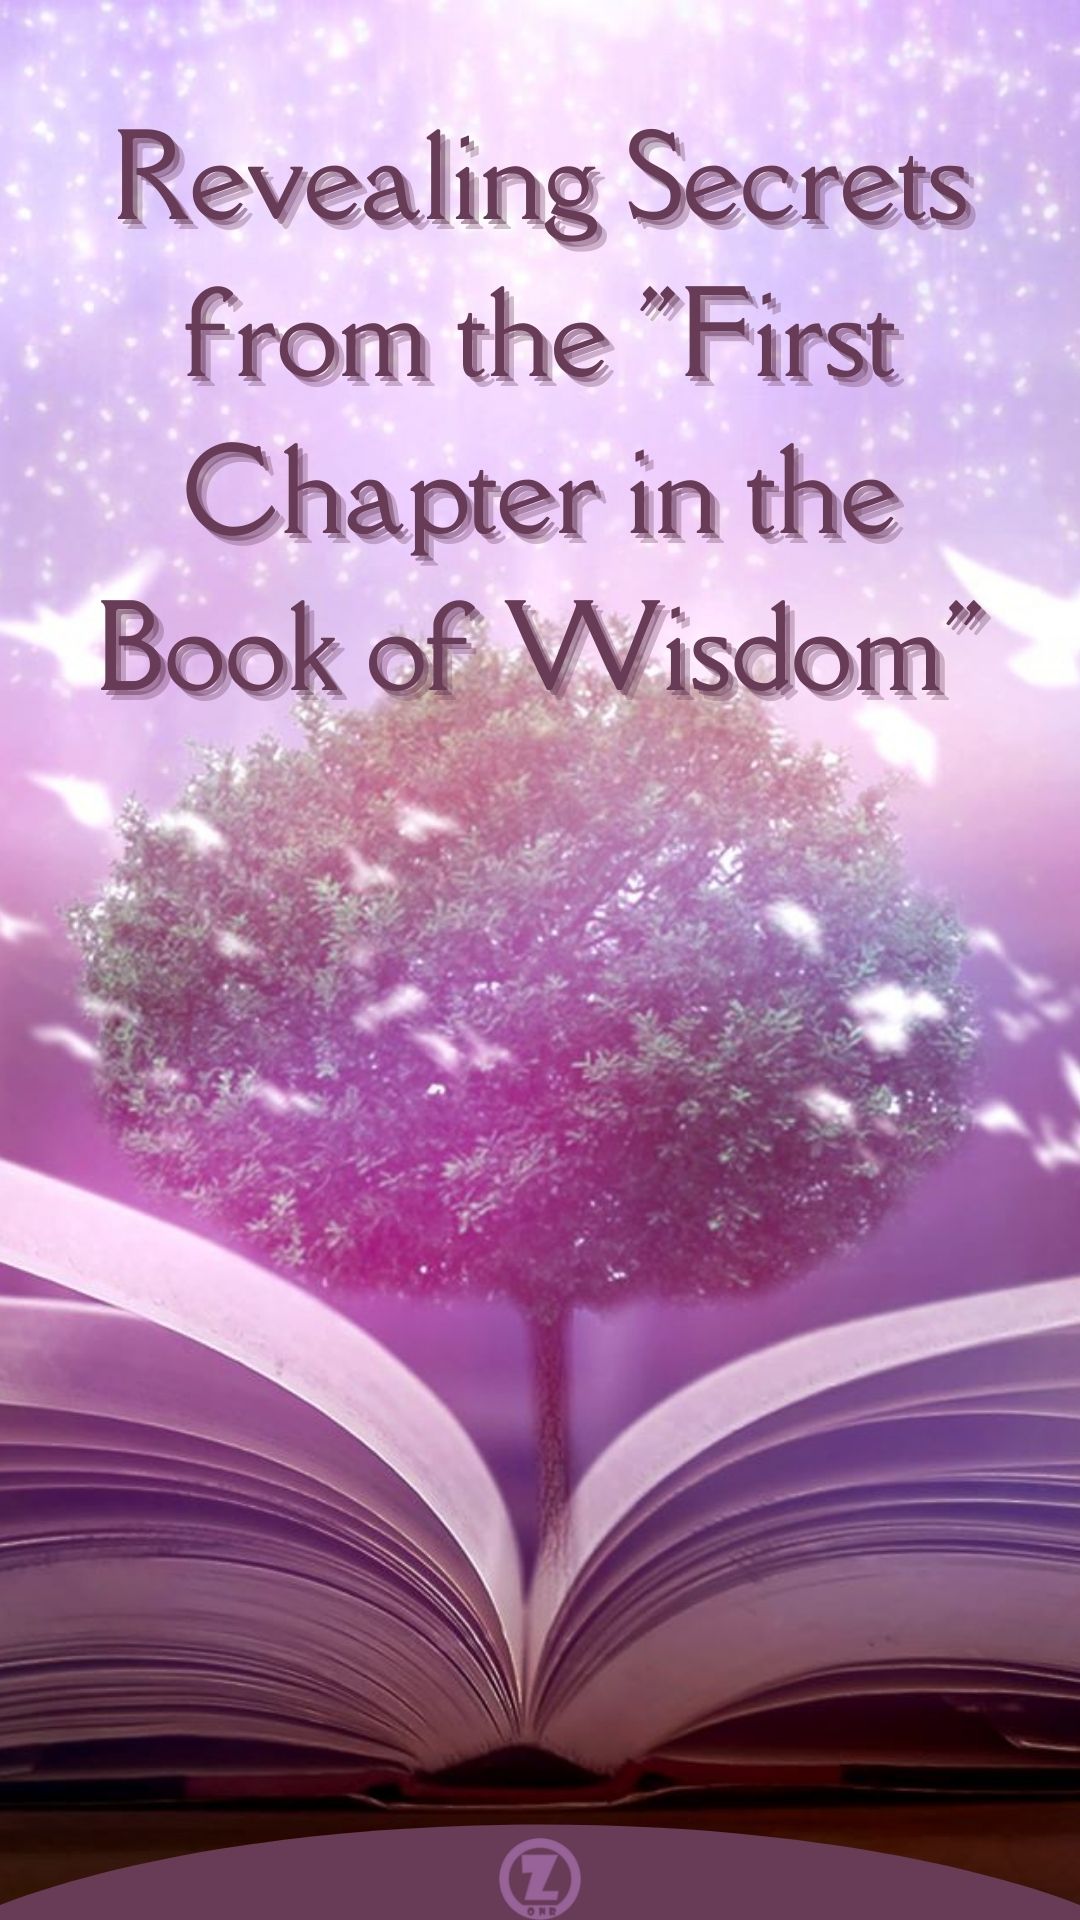 Revealing Secrets from the “First Chapter in the Book of Wisdom” – Step 1